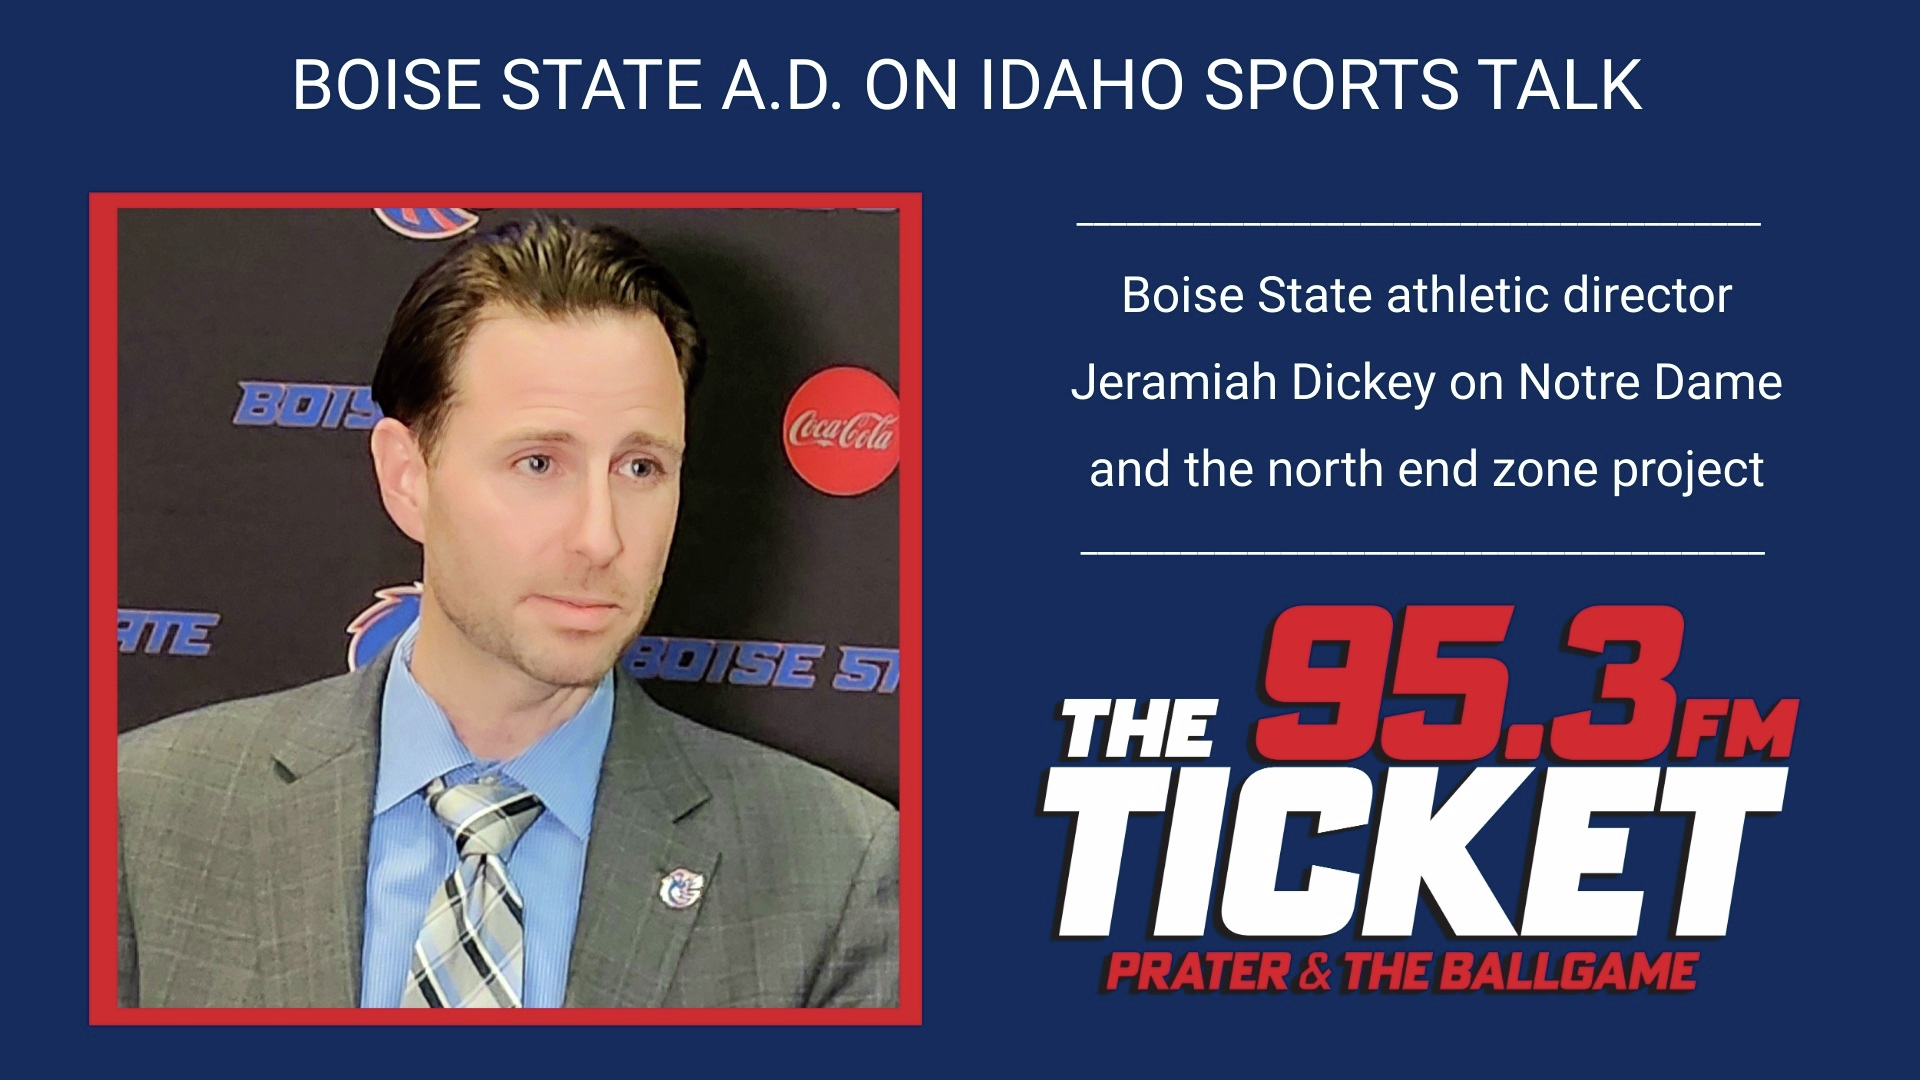 JERAMIAH DICKEY: BOISE STATE AD ON NOTRE DAME, FOOTBALL SCHEDULING AND NORTH END ZONE